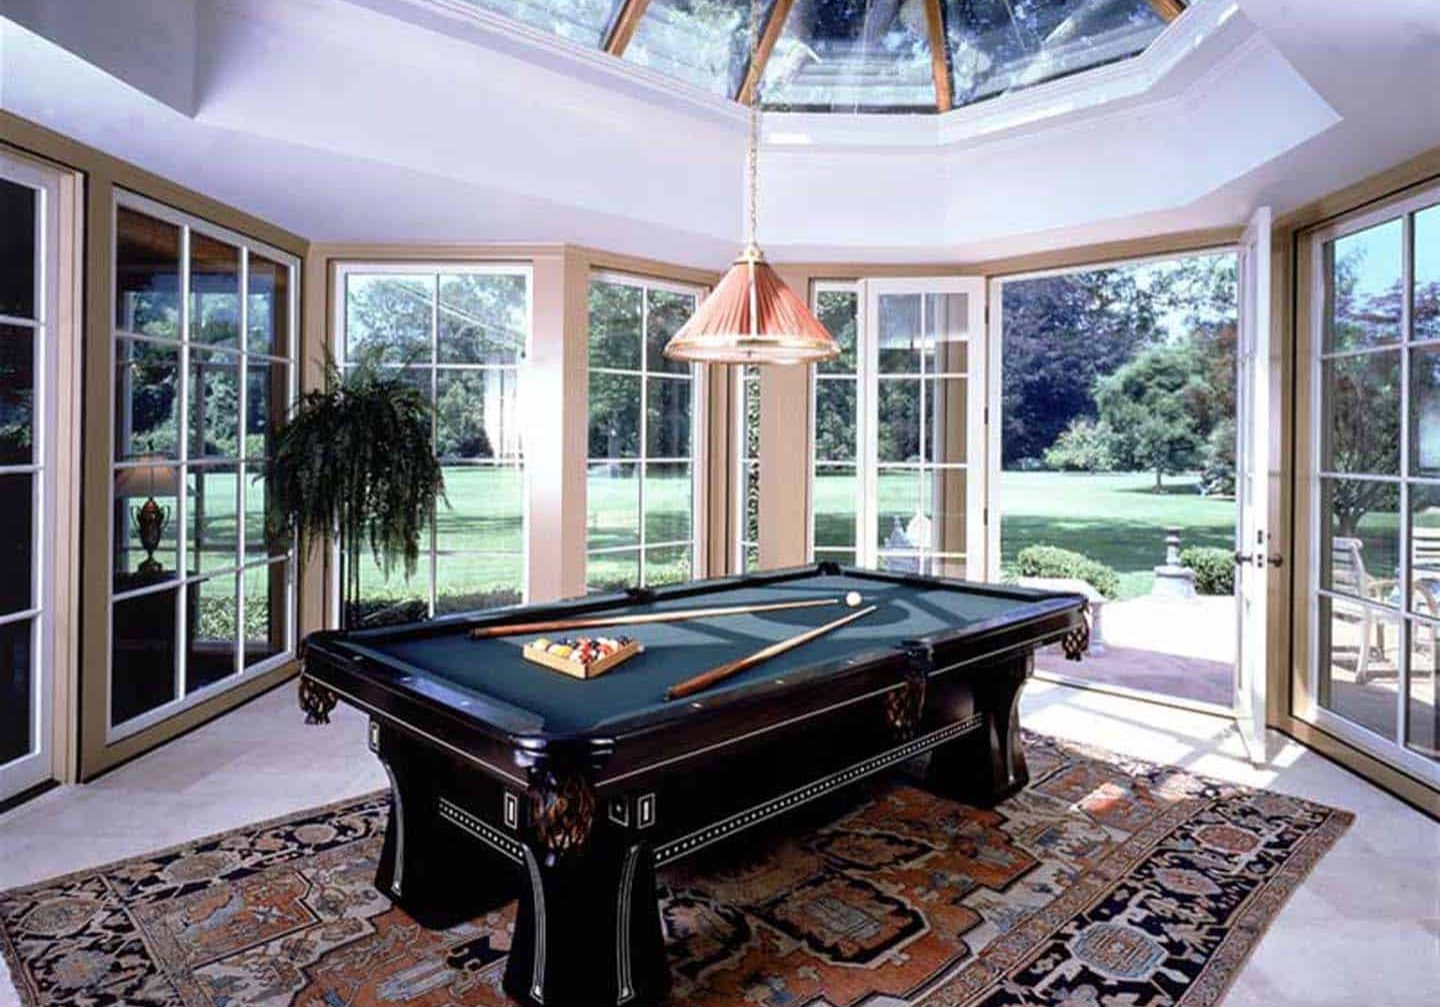 Billiards table on a rug in room with only windows and a skylight.